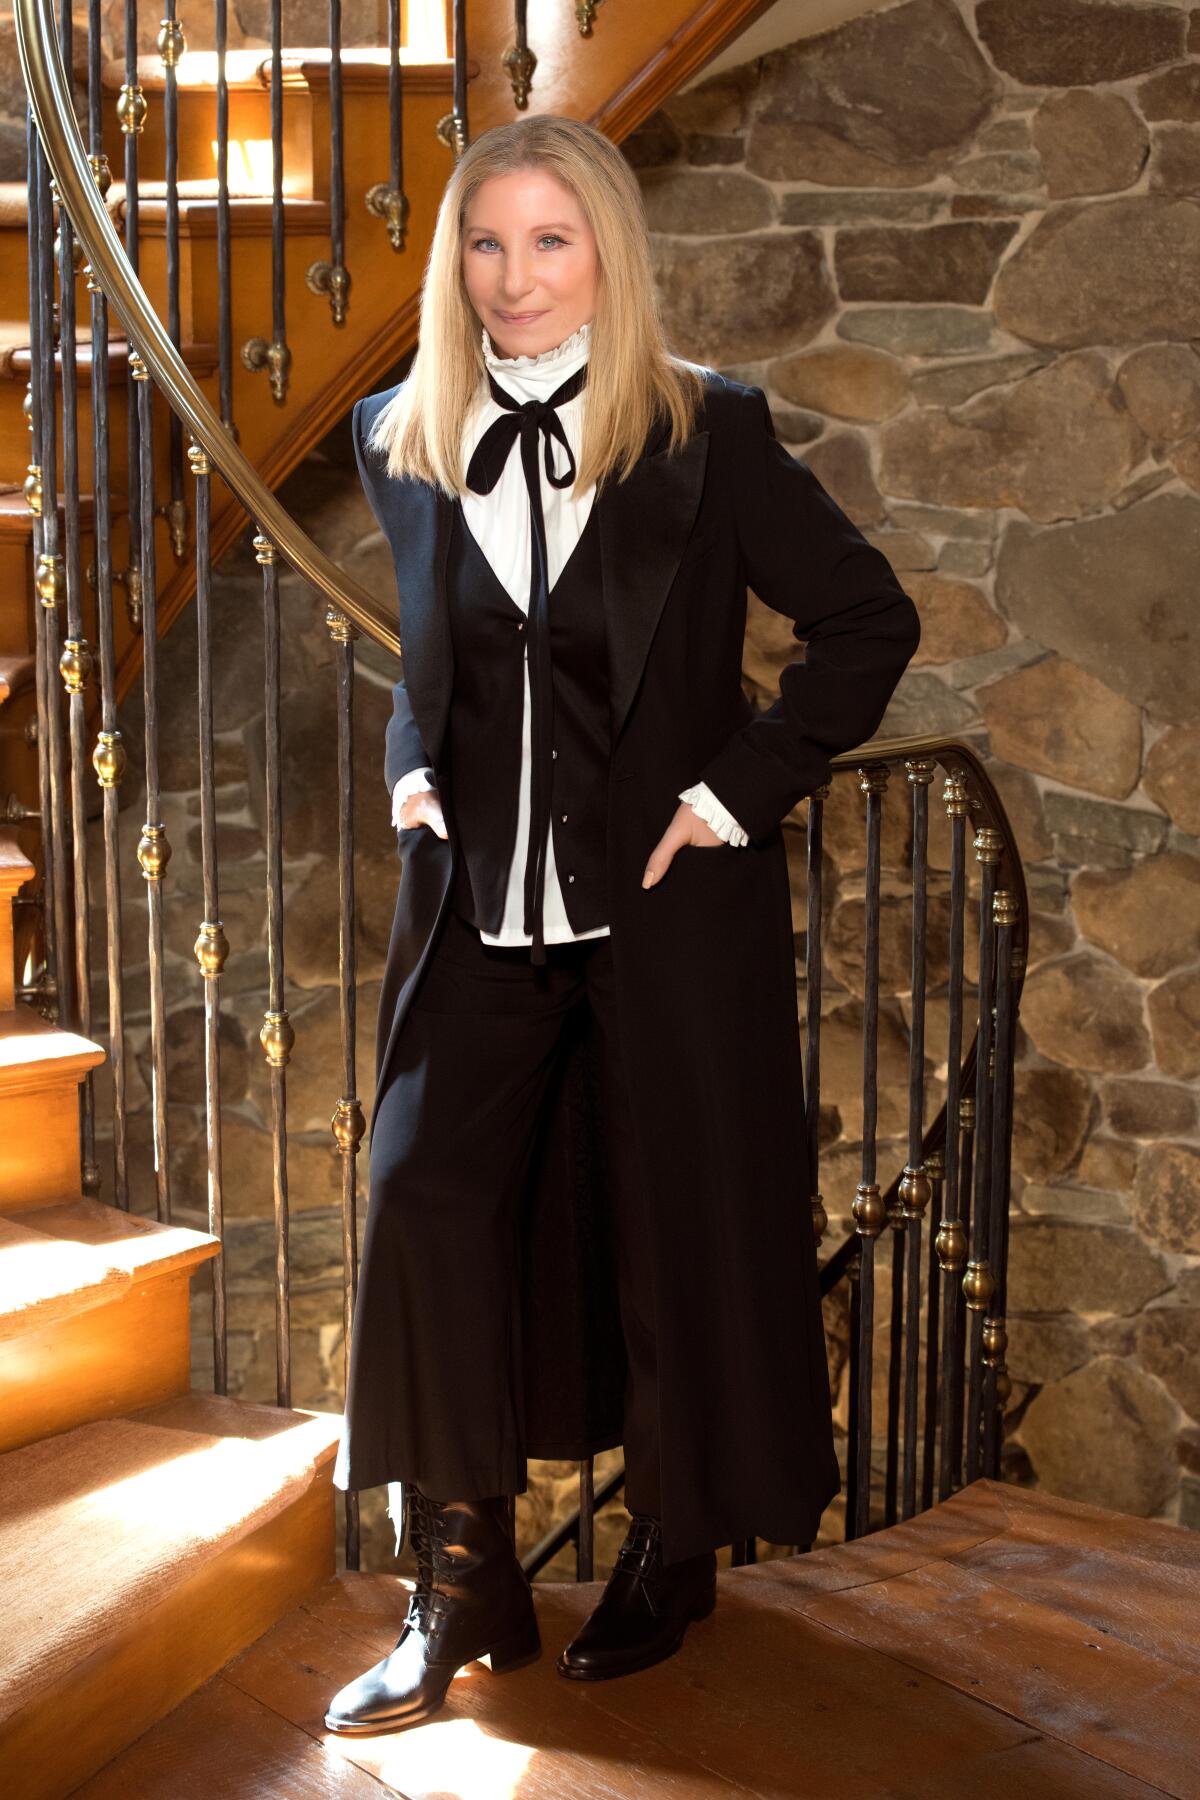 Barbra Streisand wears a black skirt and jacket with a white blouse as she poses at the foot of a staircase.